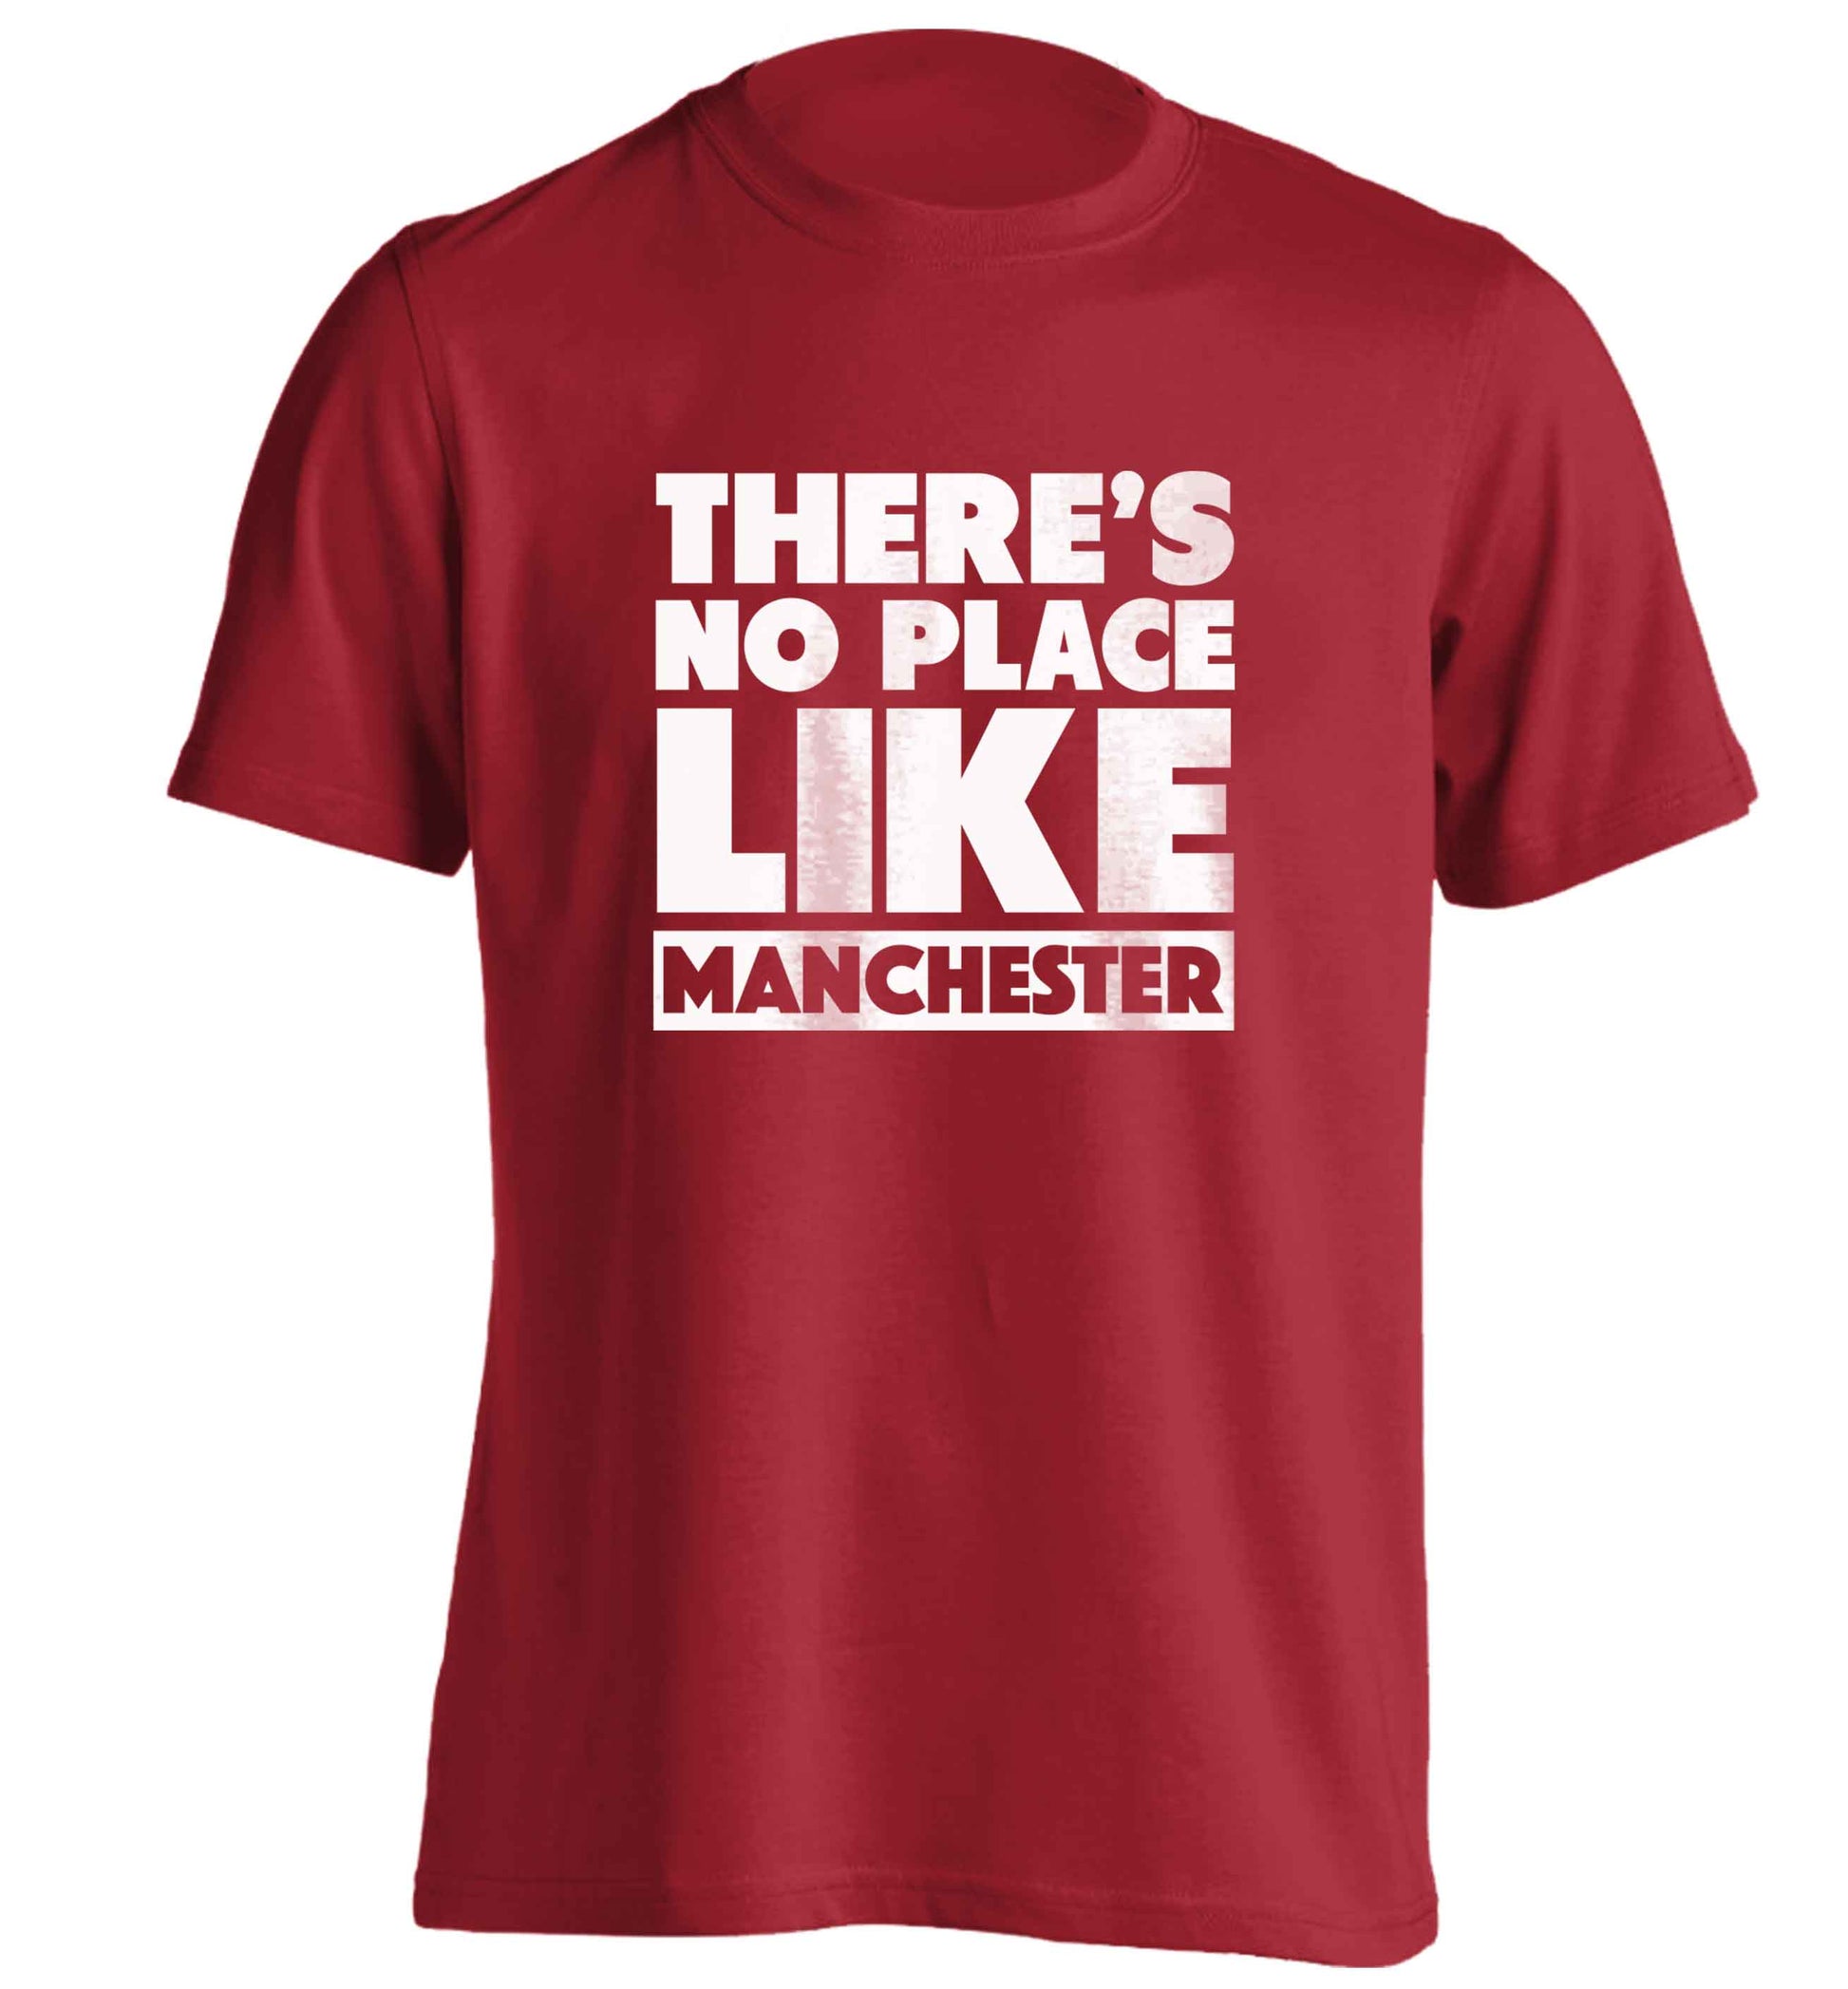 There's no place like Manchester adults unisex red Tshirt 2XL